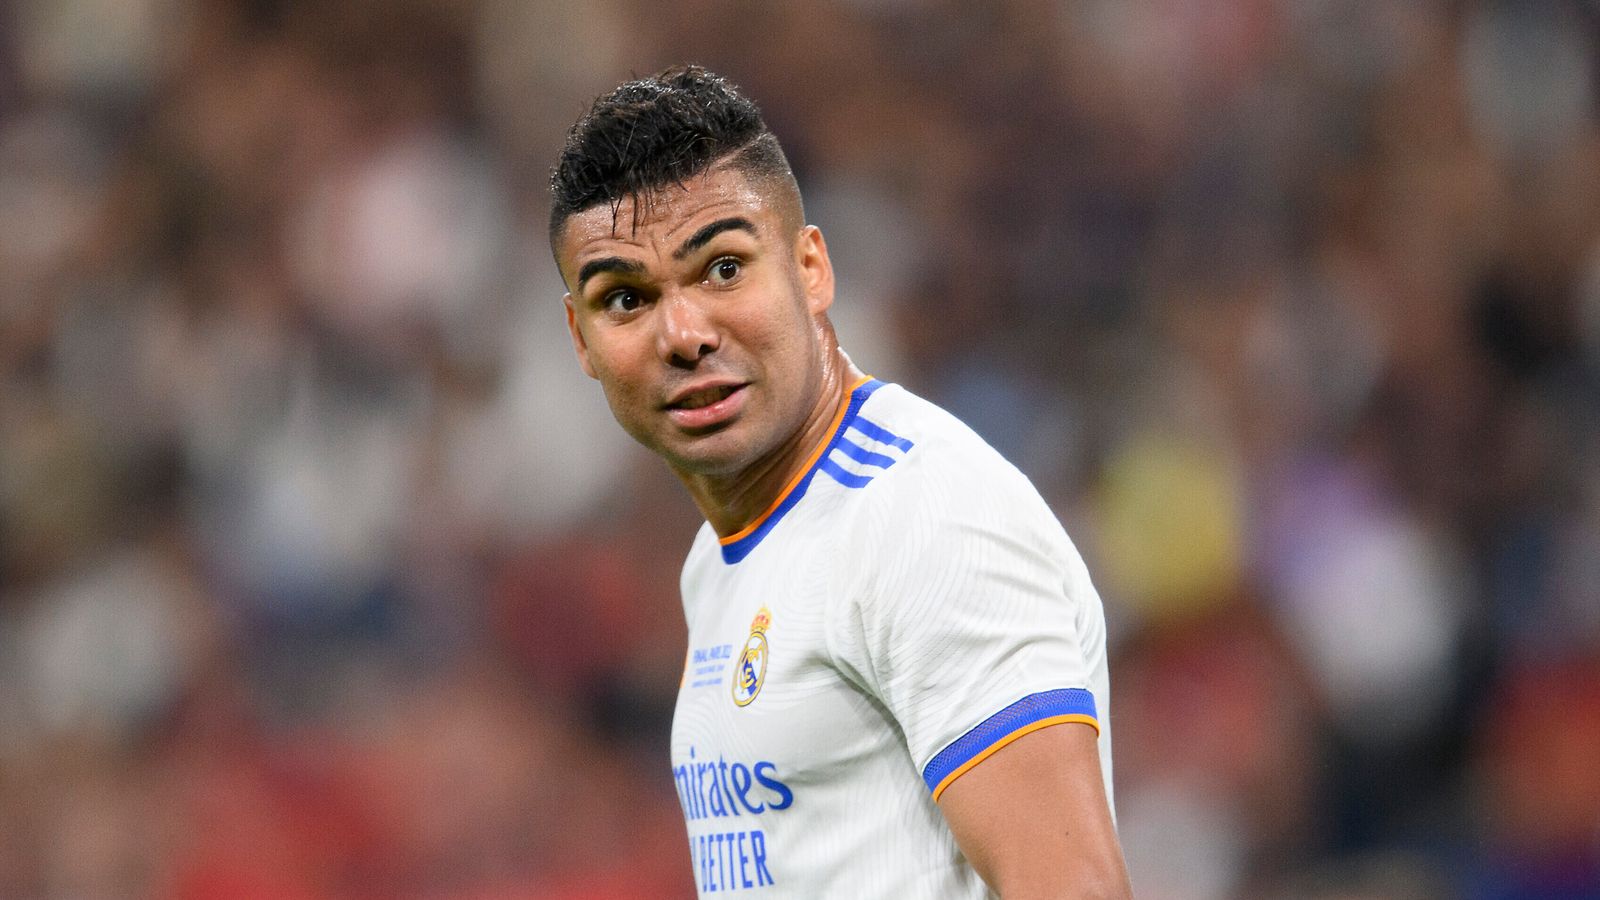 Casemiro: Manchester United agree £59.5m deal for Real Madrid midfielder